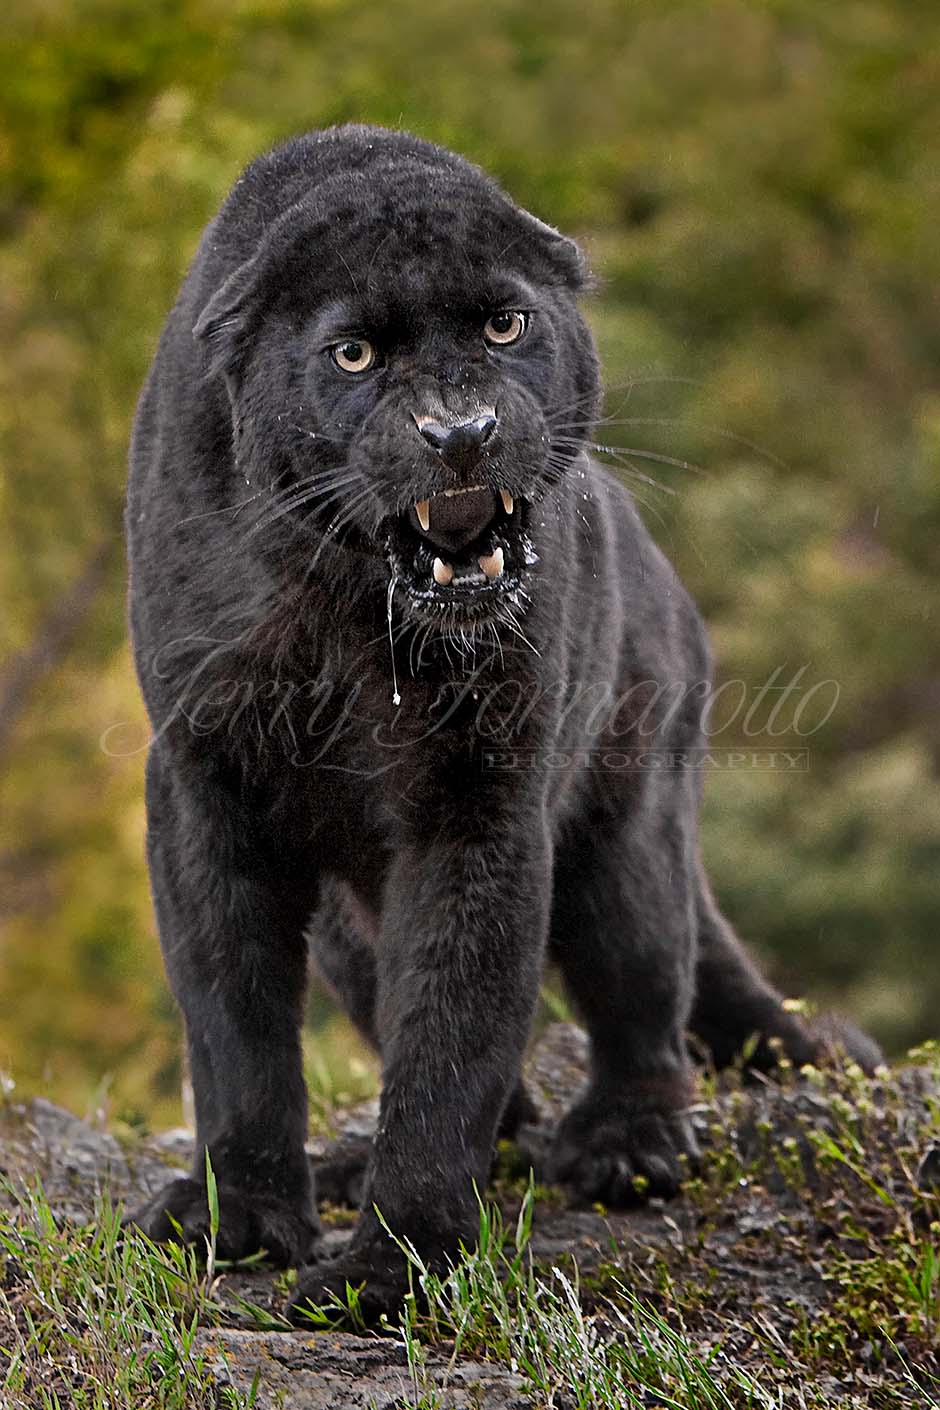 The Black panther is a rare, fearless, powerful and intelligent animal.  It is one of the most aggressive and most feared animals in the world.  The black panther is not a distinct animal species though.  The term black panther is commonly used for one or several kinds of closely related all-black big cats